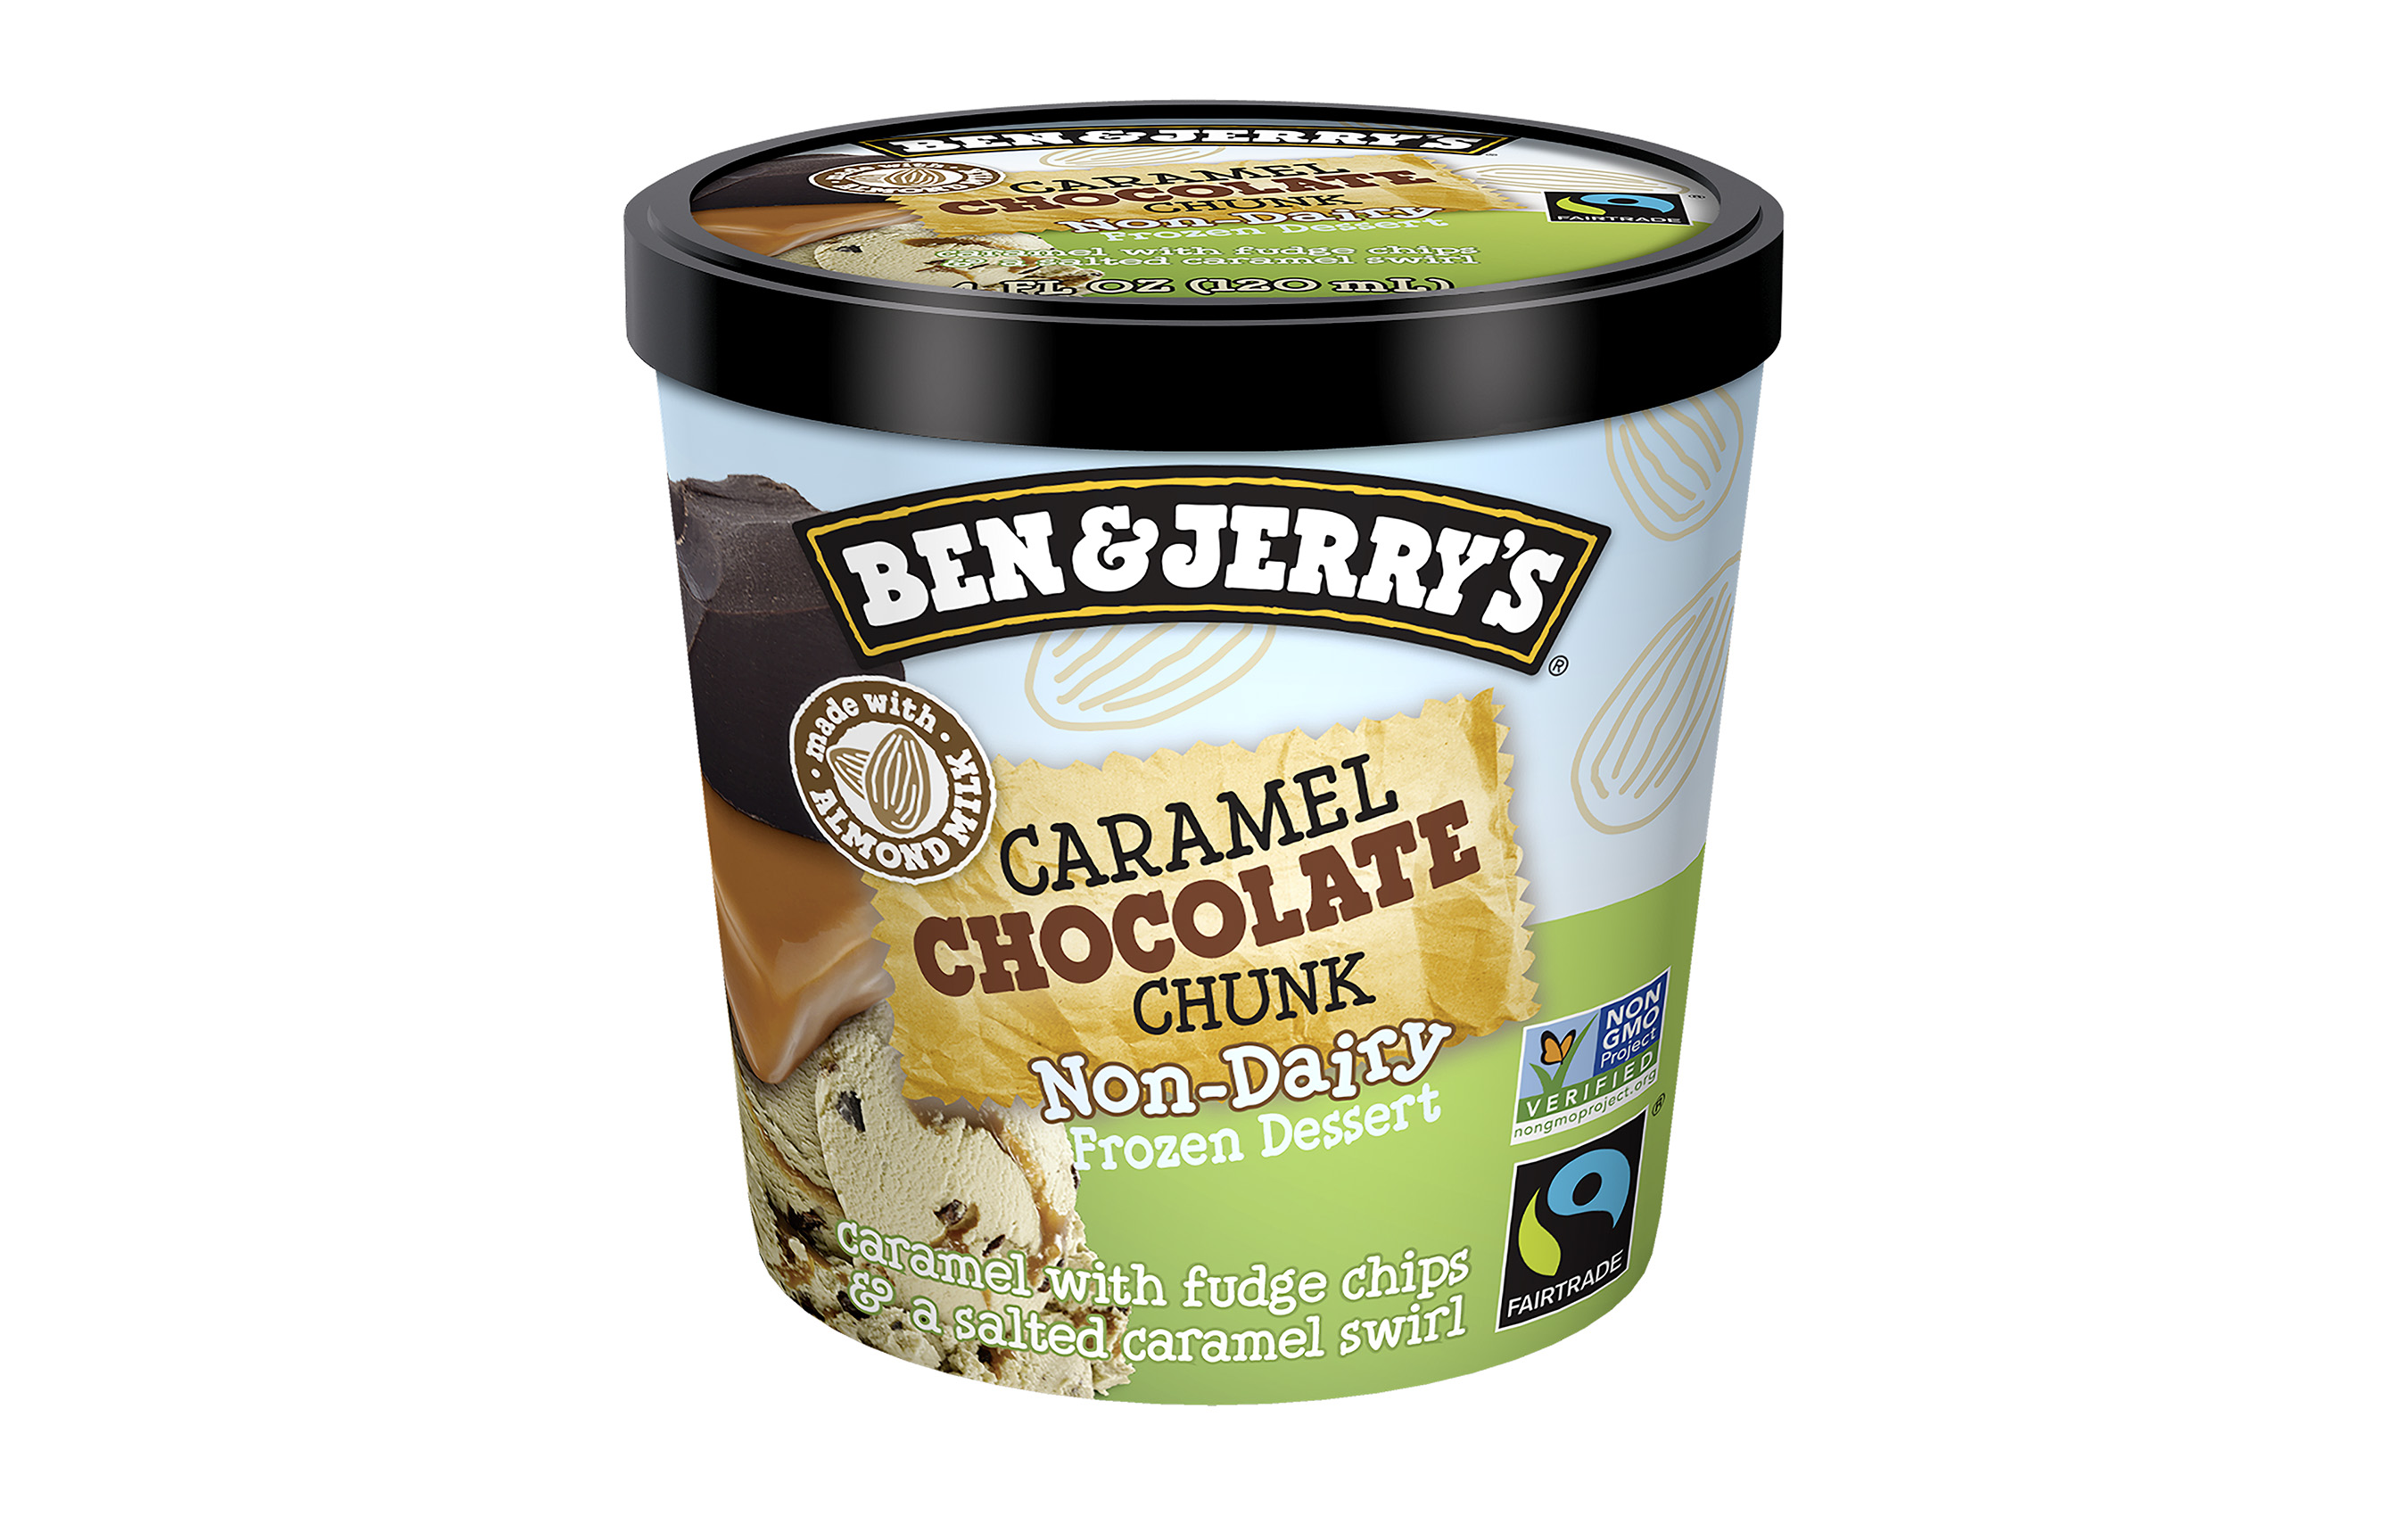 Ben & Jerry’s new Caramel Chocolate Chunk Mini Cup features caramel non-dairy frozen dessert with fudge chips & a salted caramel swirl in a portion control cup that’s great on the go.